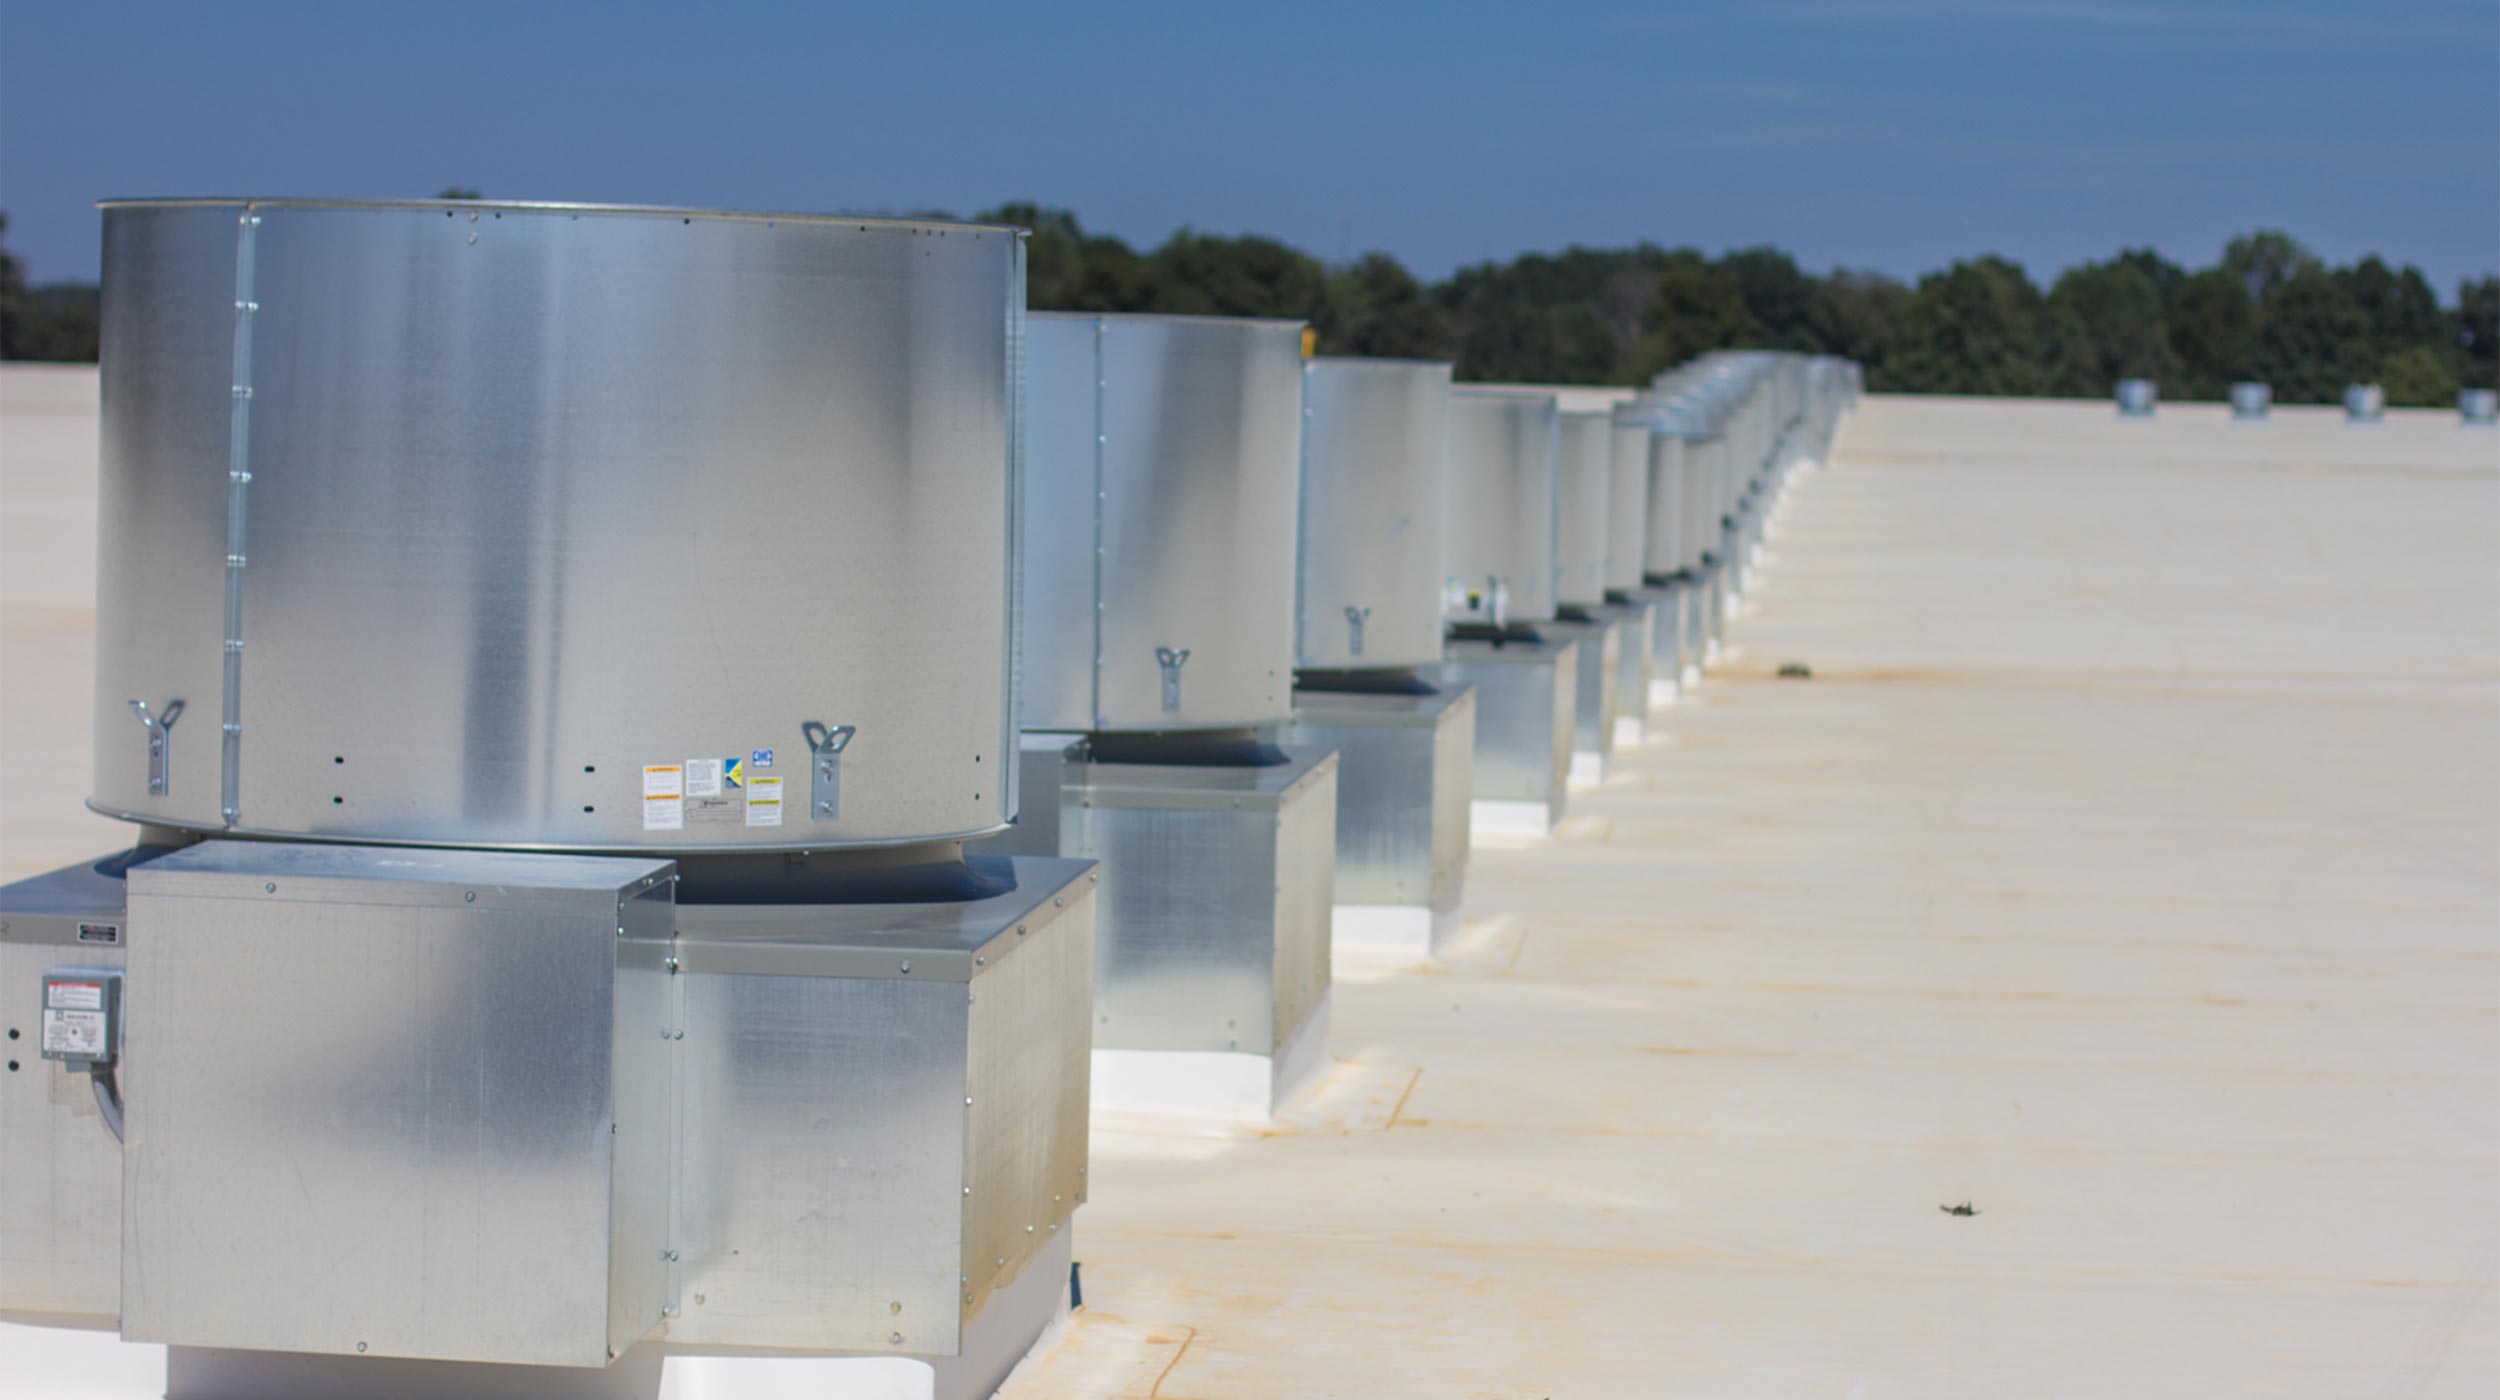 Rooftop units at Academy Sports